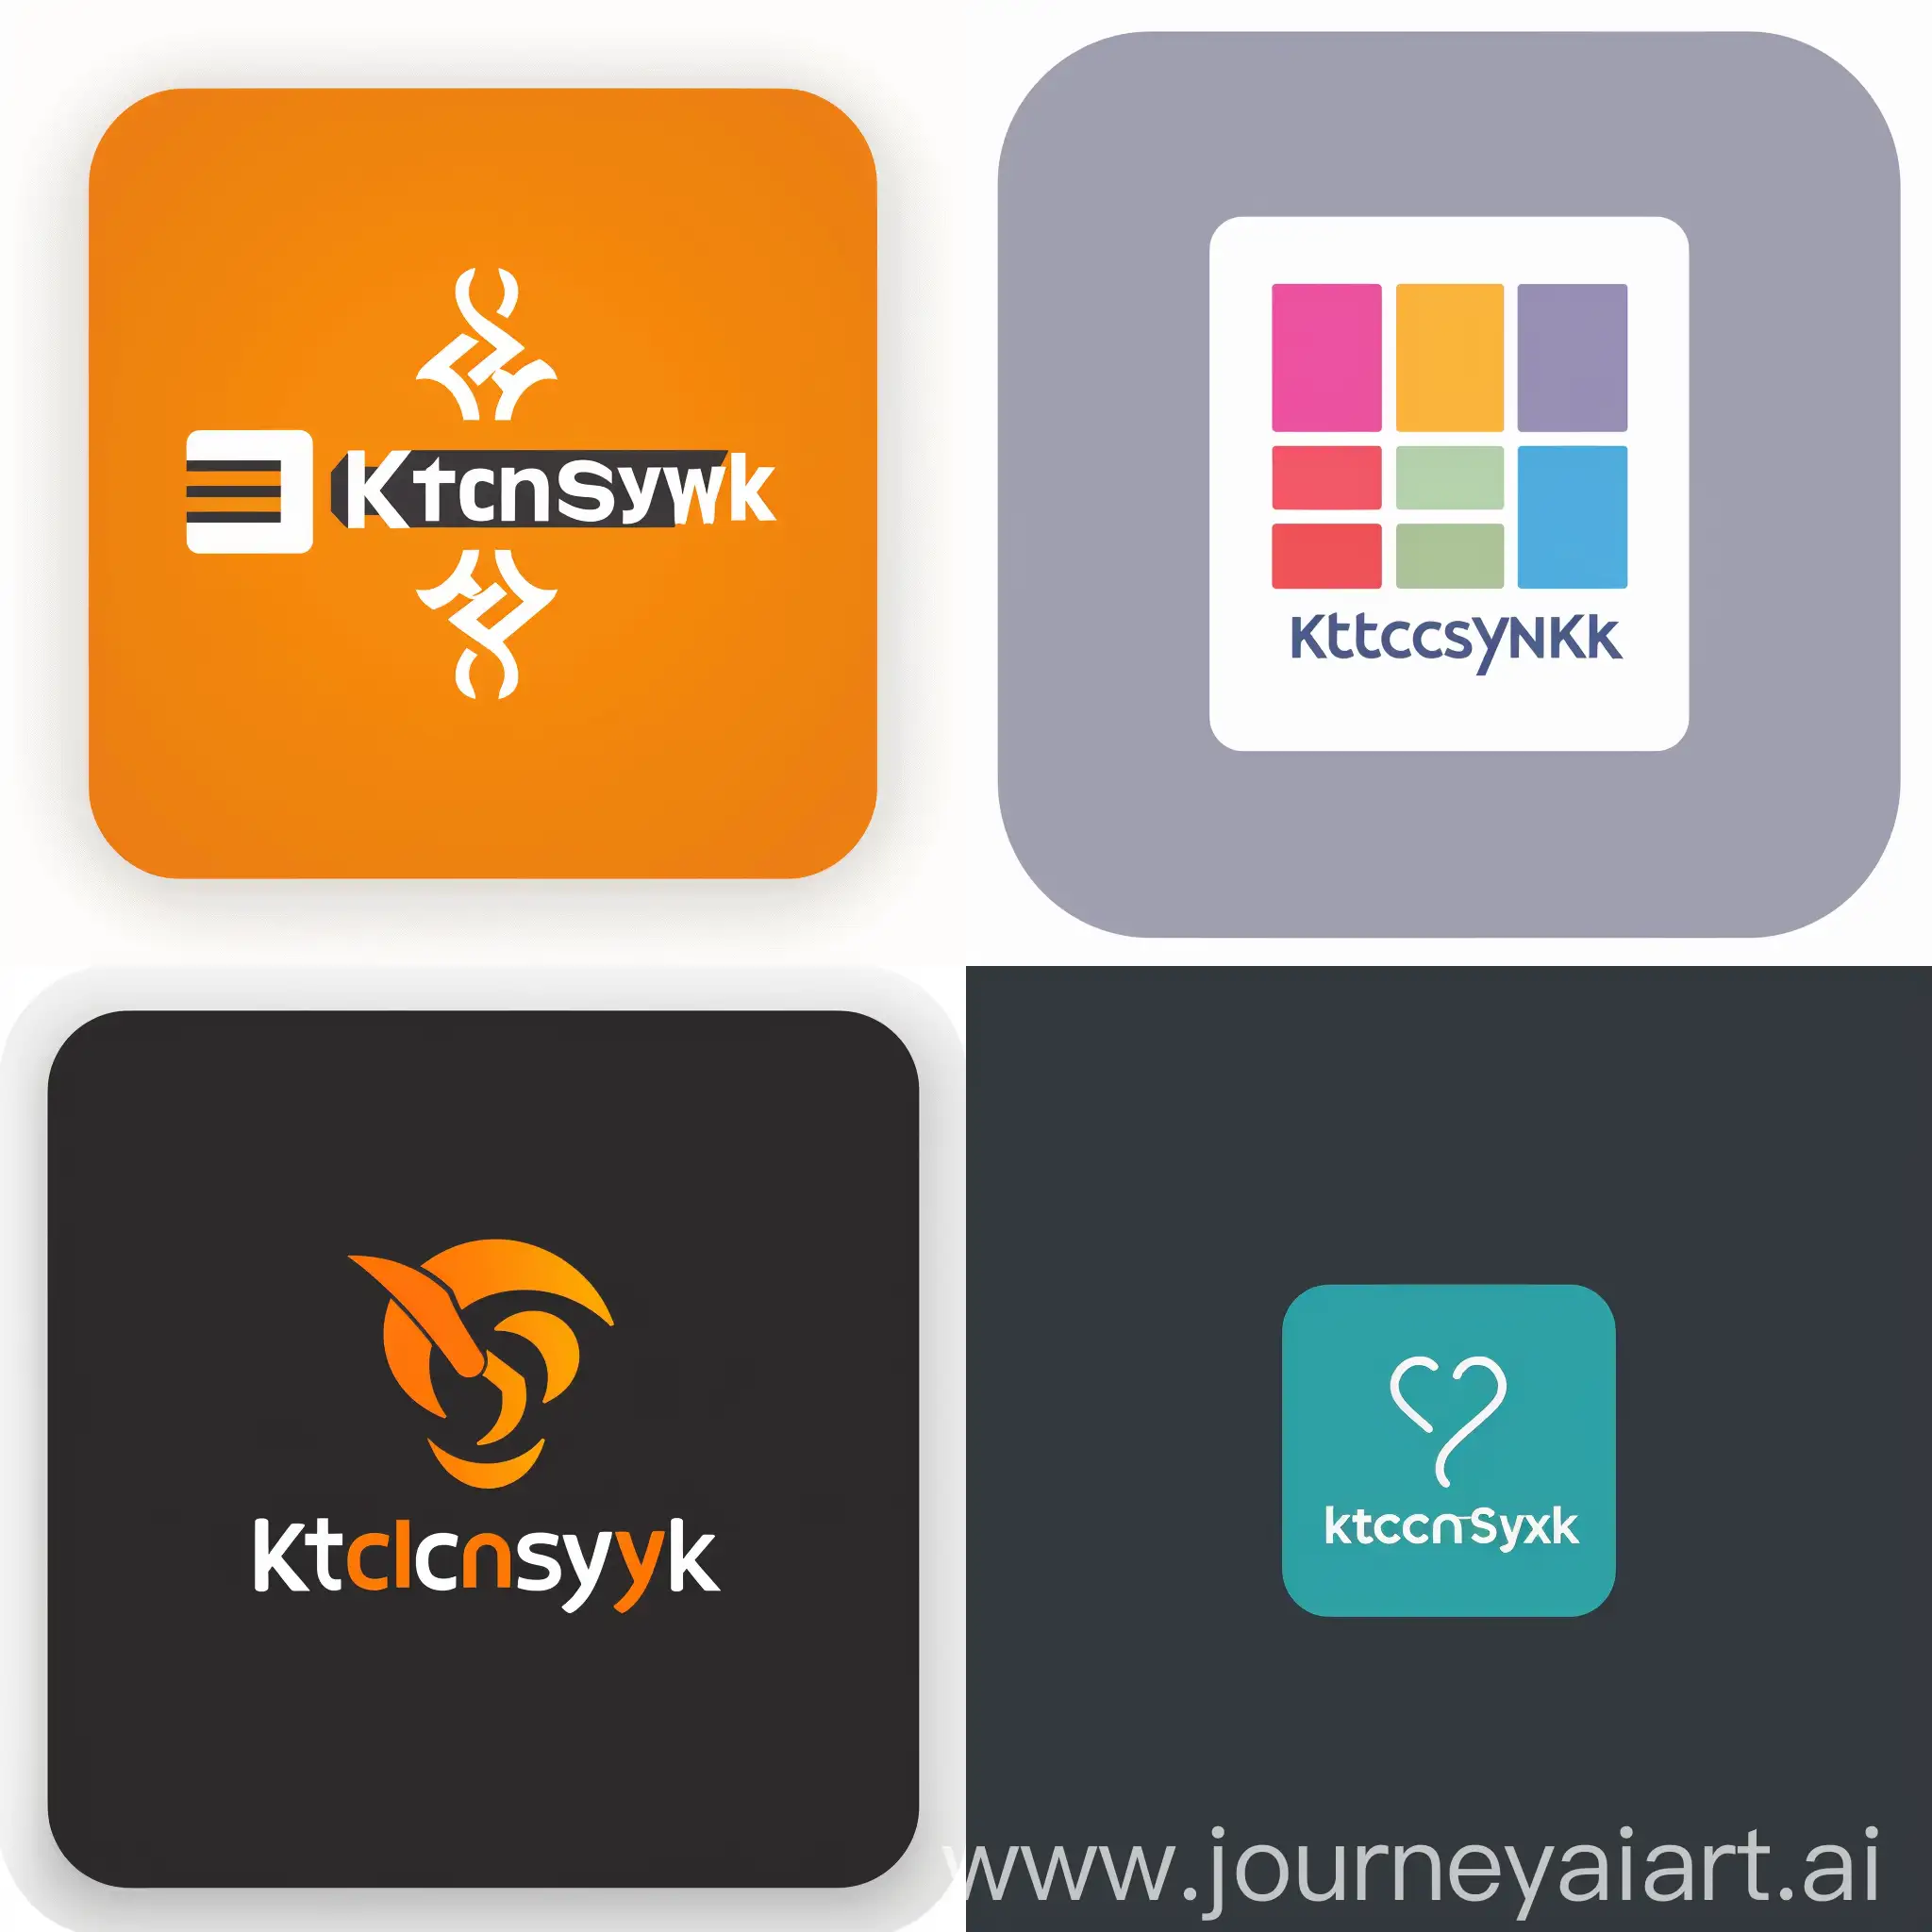 Create logo icon or favicon for software. The program is called KitchenSynk and its software for contractors.  It will do everything for their business from lead tracking, quoting, scheduling, social media, etc